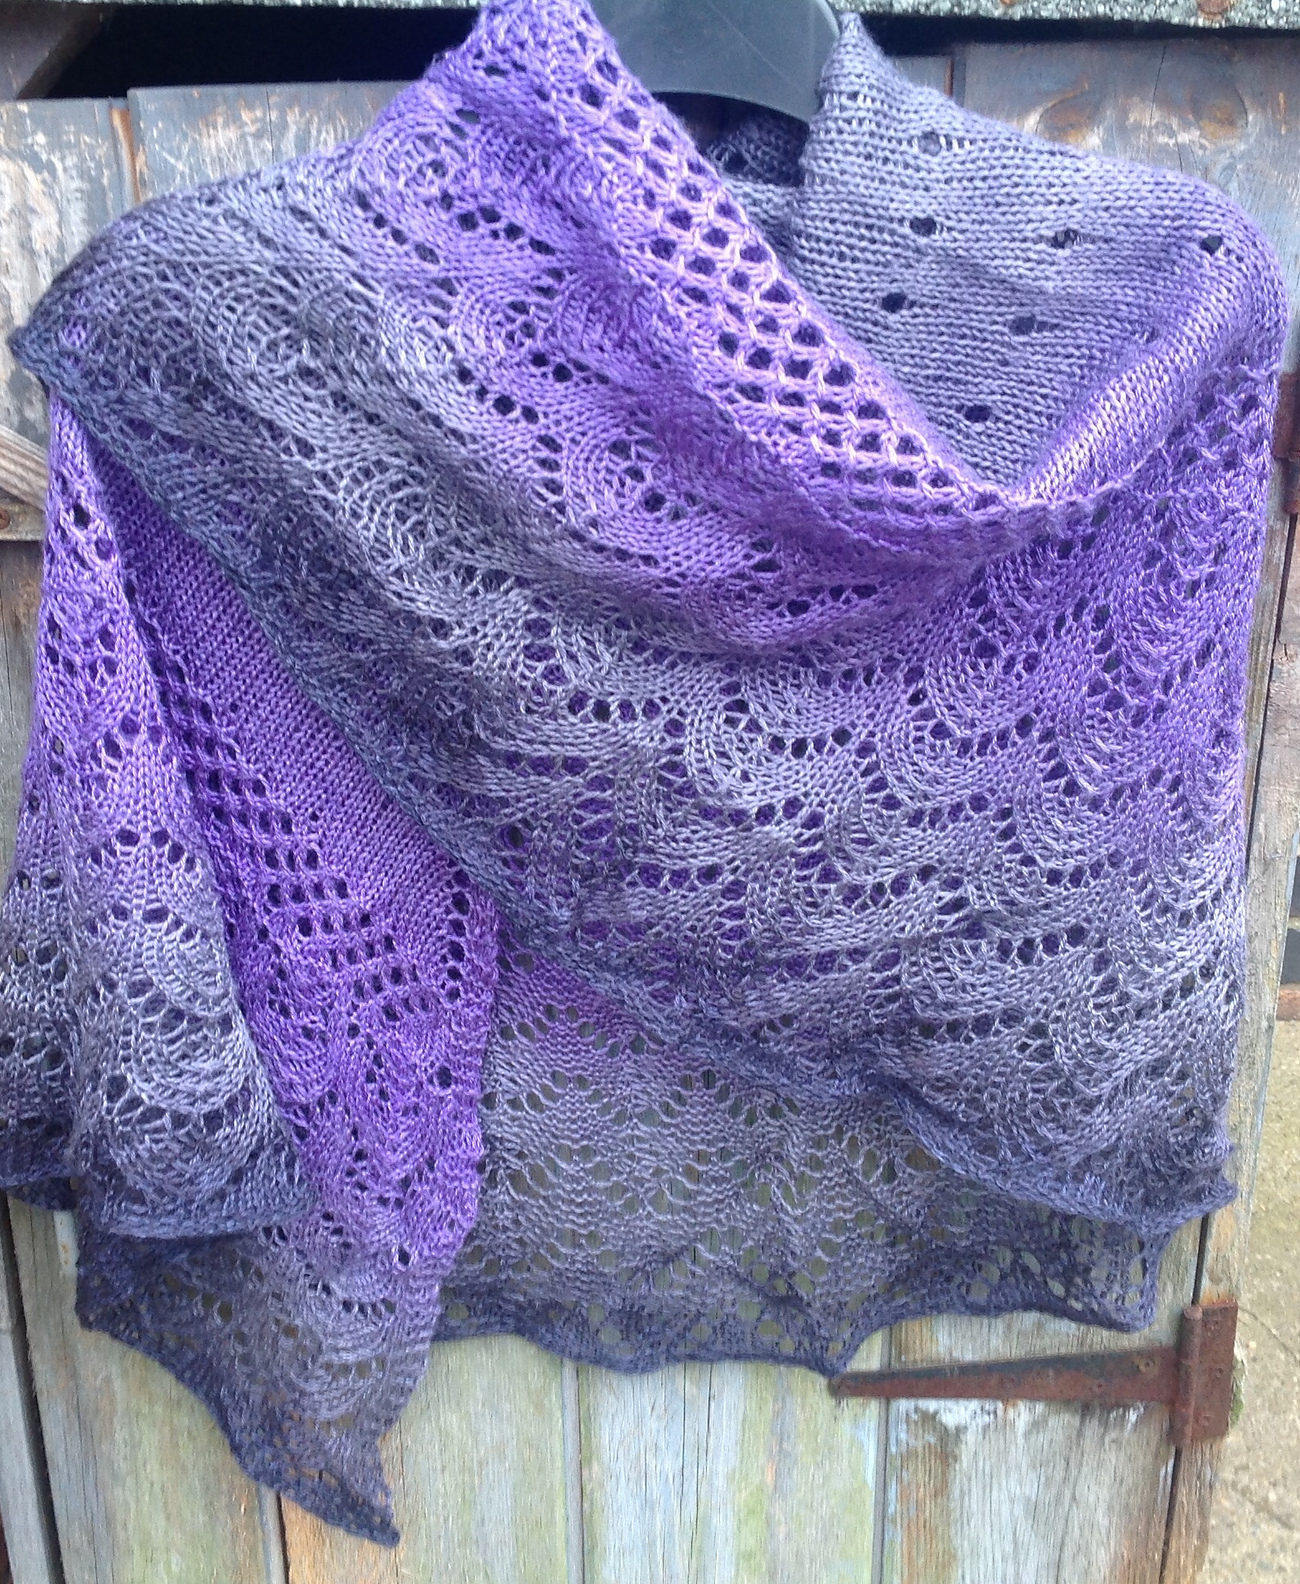 Knitted Shawls Patterns Free One Skein Shawl Knitting Patterns In The Loop Knitting